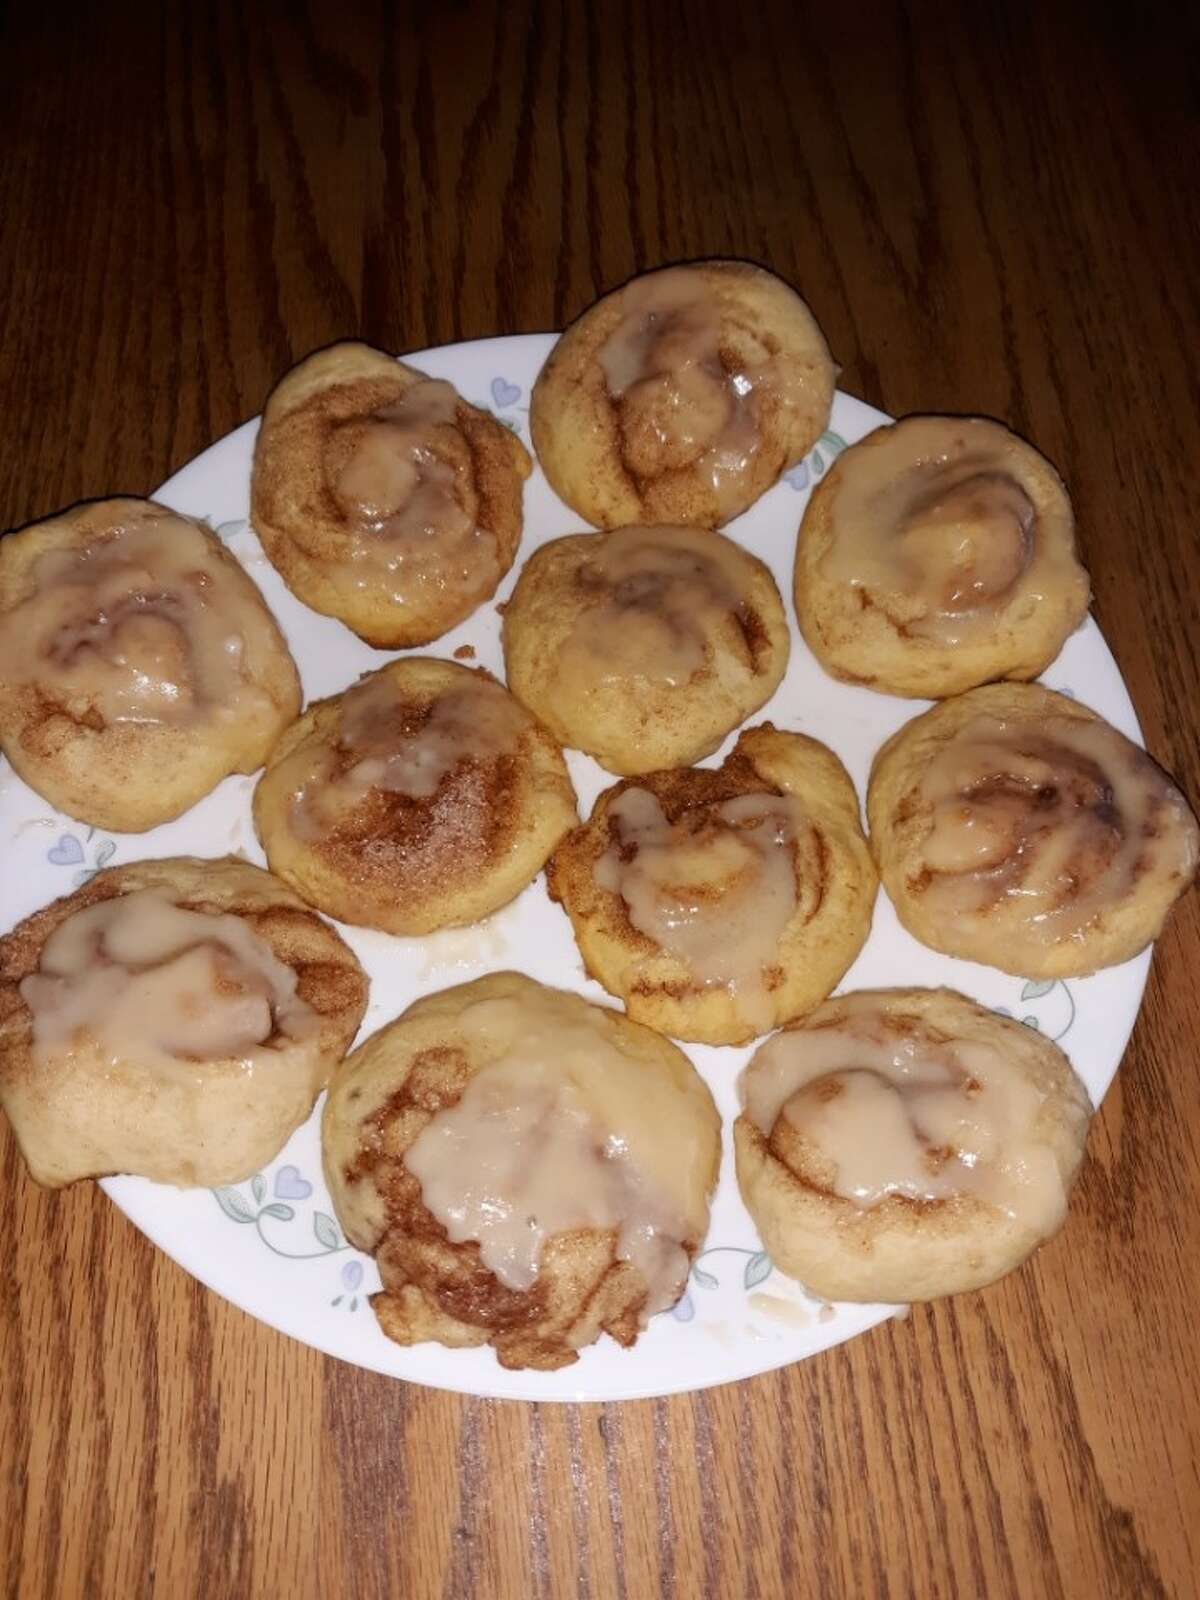 Lovina Eicher shares her recipe for cinnamon roll cookies in this week's Amish Kitchen.